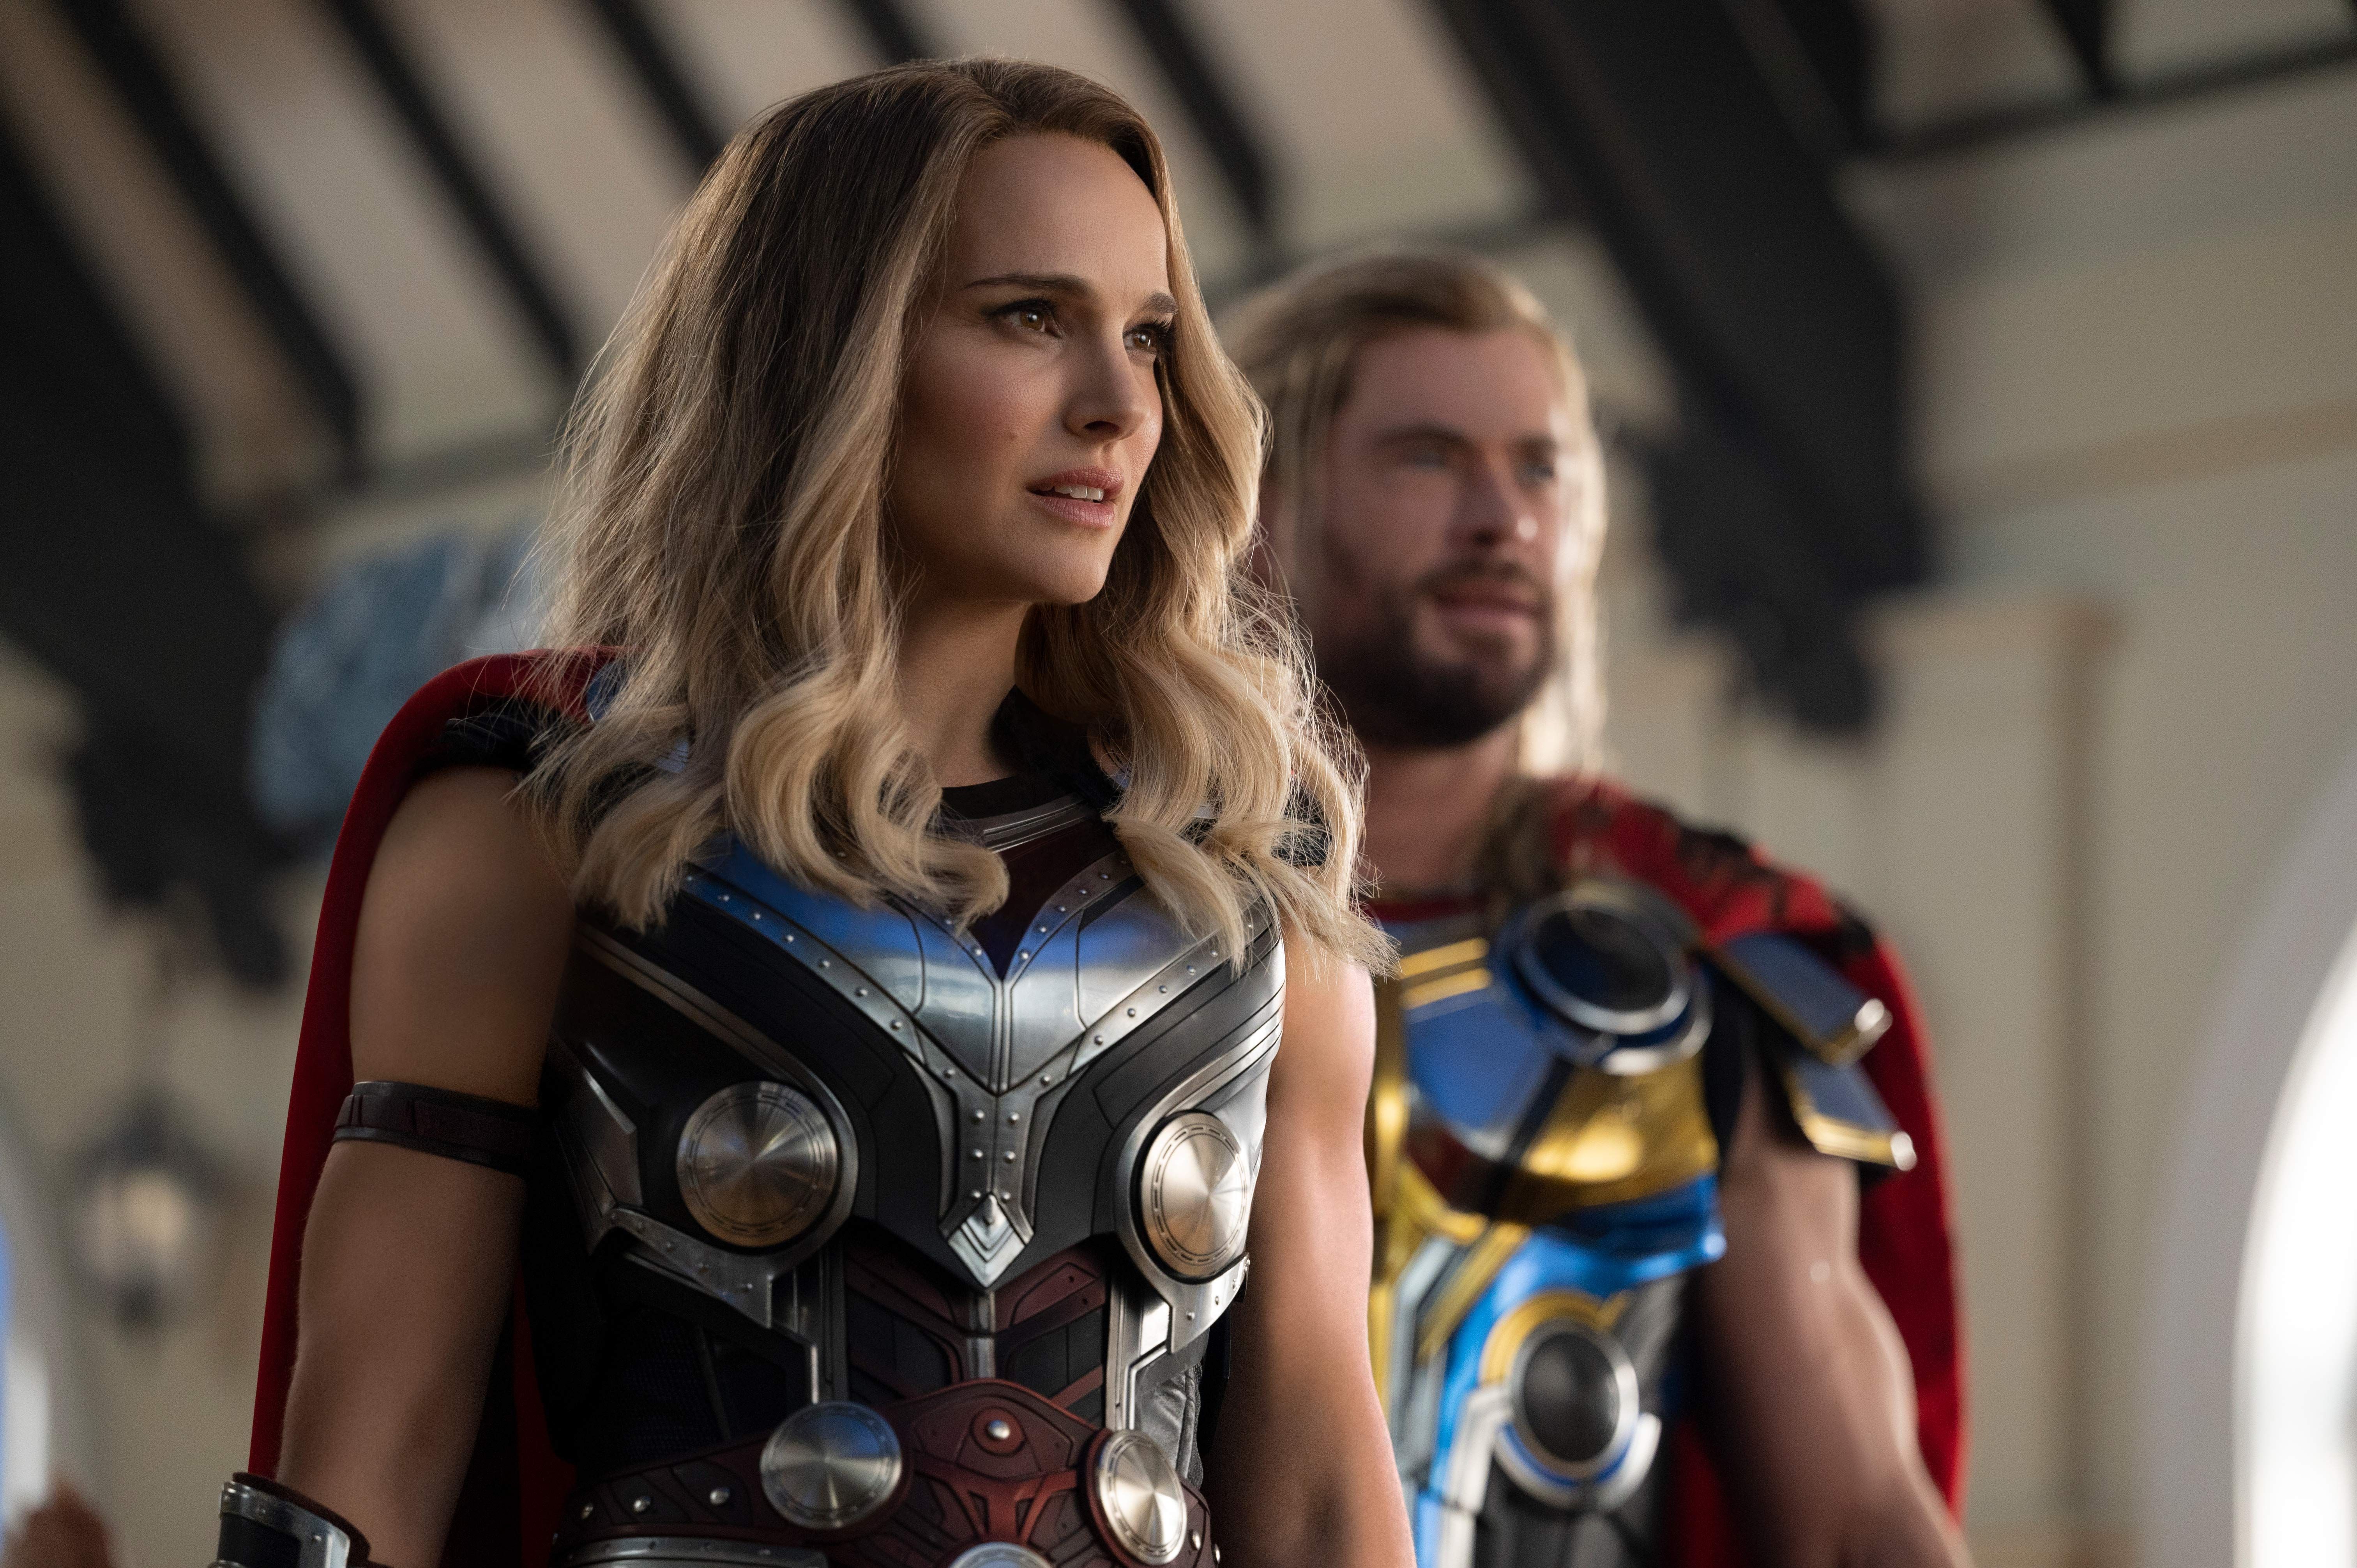 Thor: Love and Thunder Blu-ray Date and Special Features Revealed